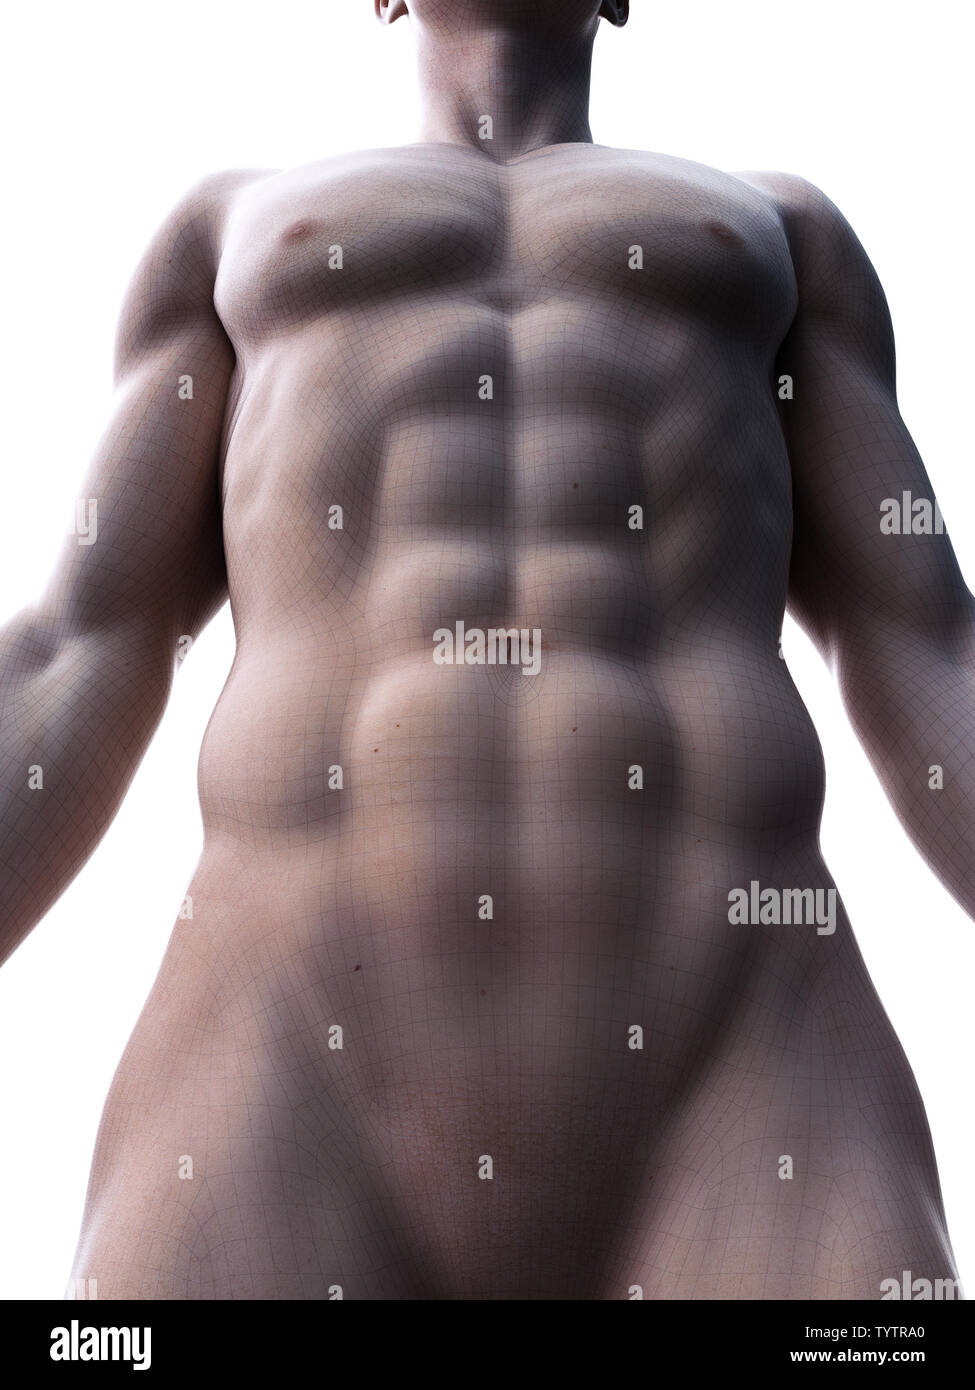 3d rendered medically accurate illustration of sixpack abs Stock Photo